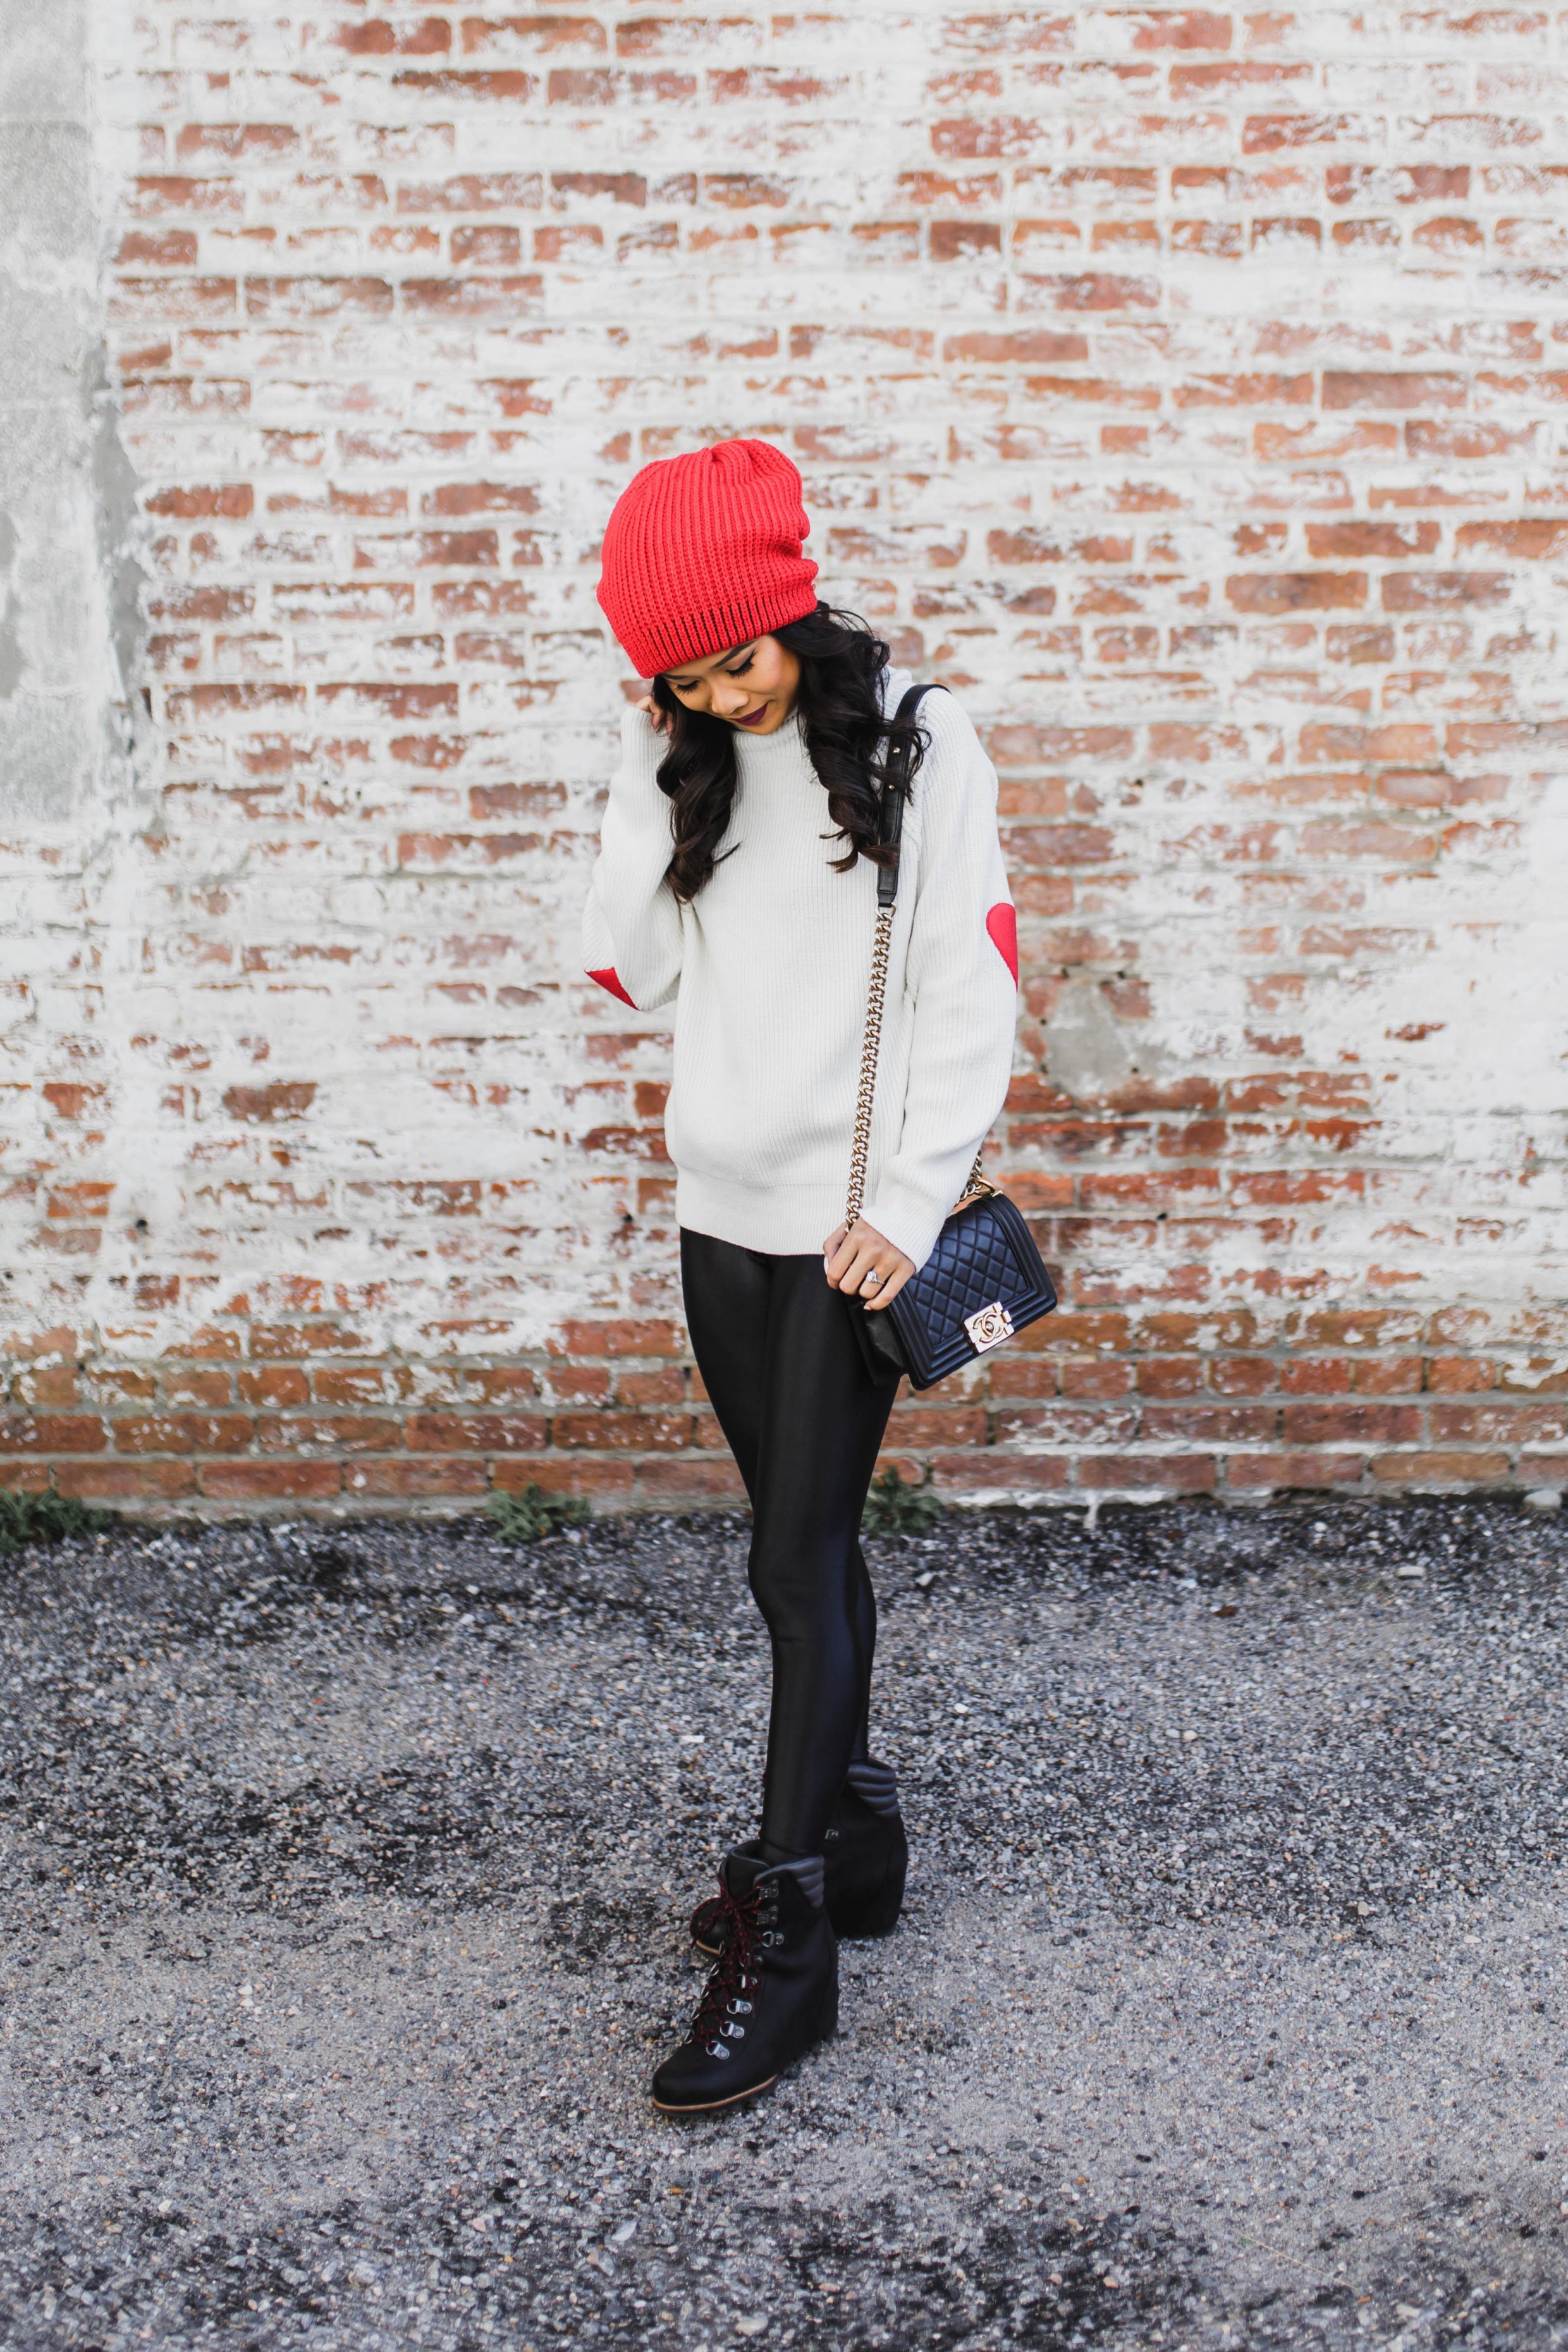 Heart Patch Sweater with black leggings and conquest winter boots